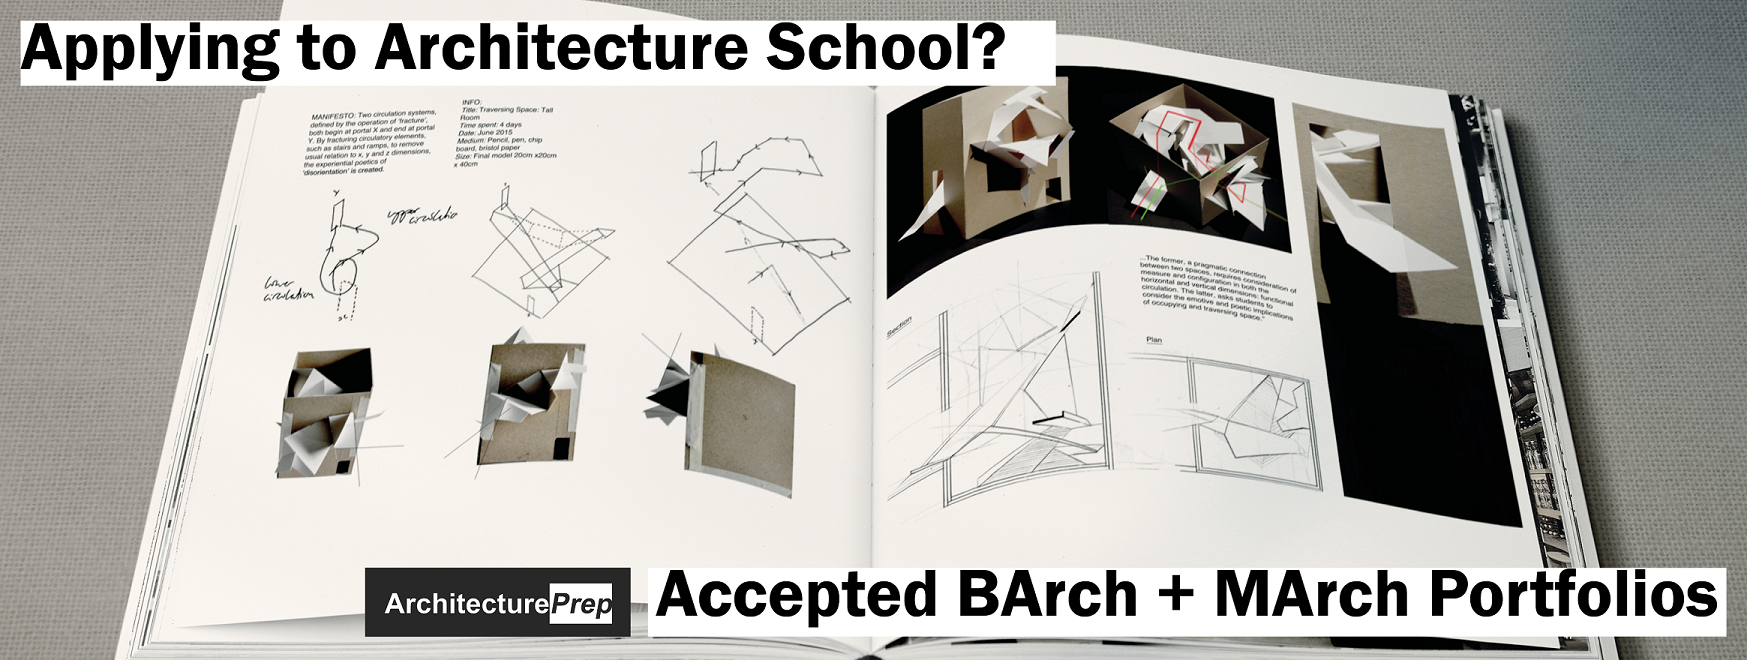 A high school portfolio for architecture school. This architecture school portfolio is a design portfolio for admissions to architecture school. This portfolio is for B.Arch applications, BArch applications, M.Arch applications and MArch applications. This portfolio was used for admissions to the Cornell AAP BArch program and was accepted at the Bartlett School of Architecture for their BSc program, the AA and SCI-Arc.